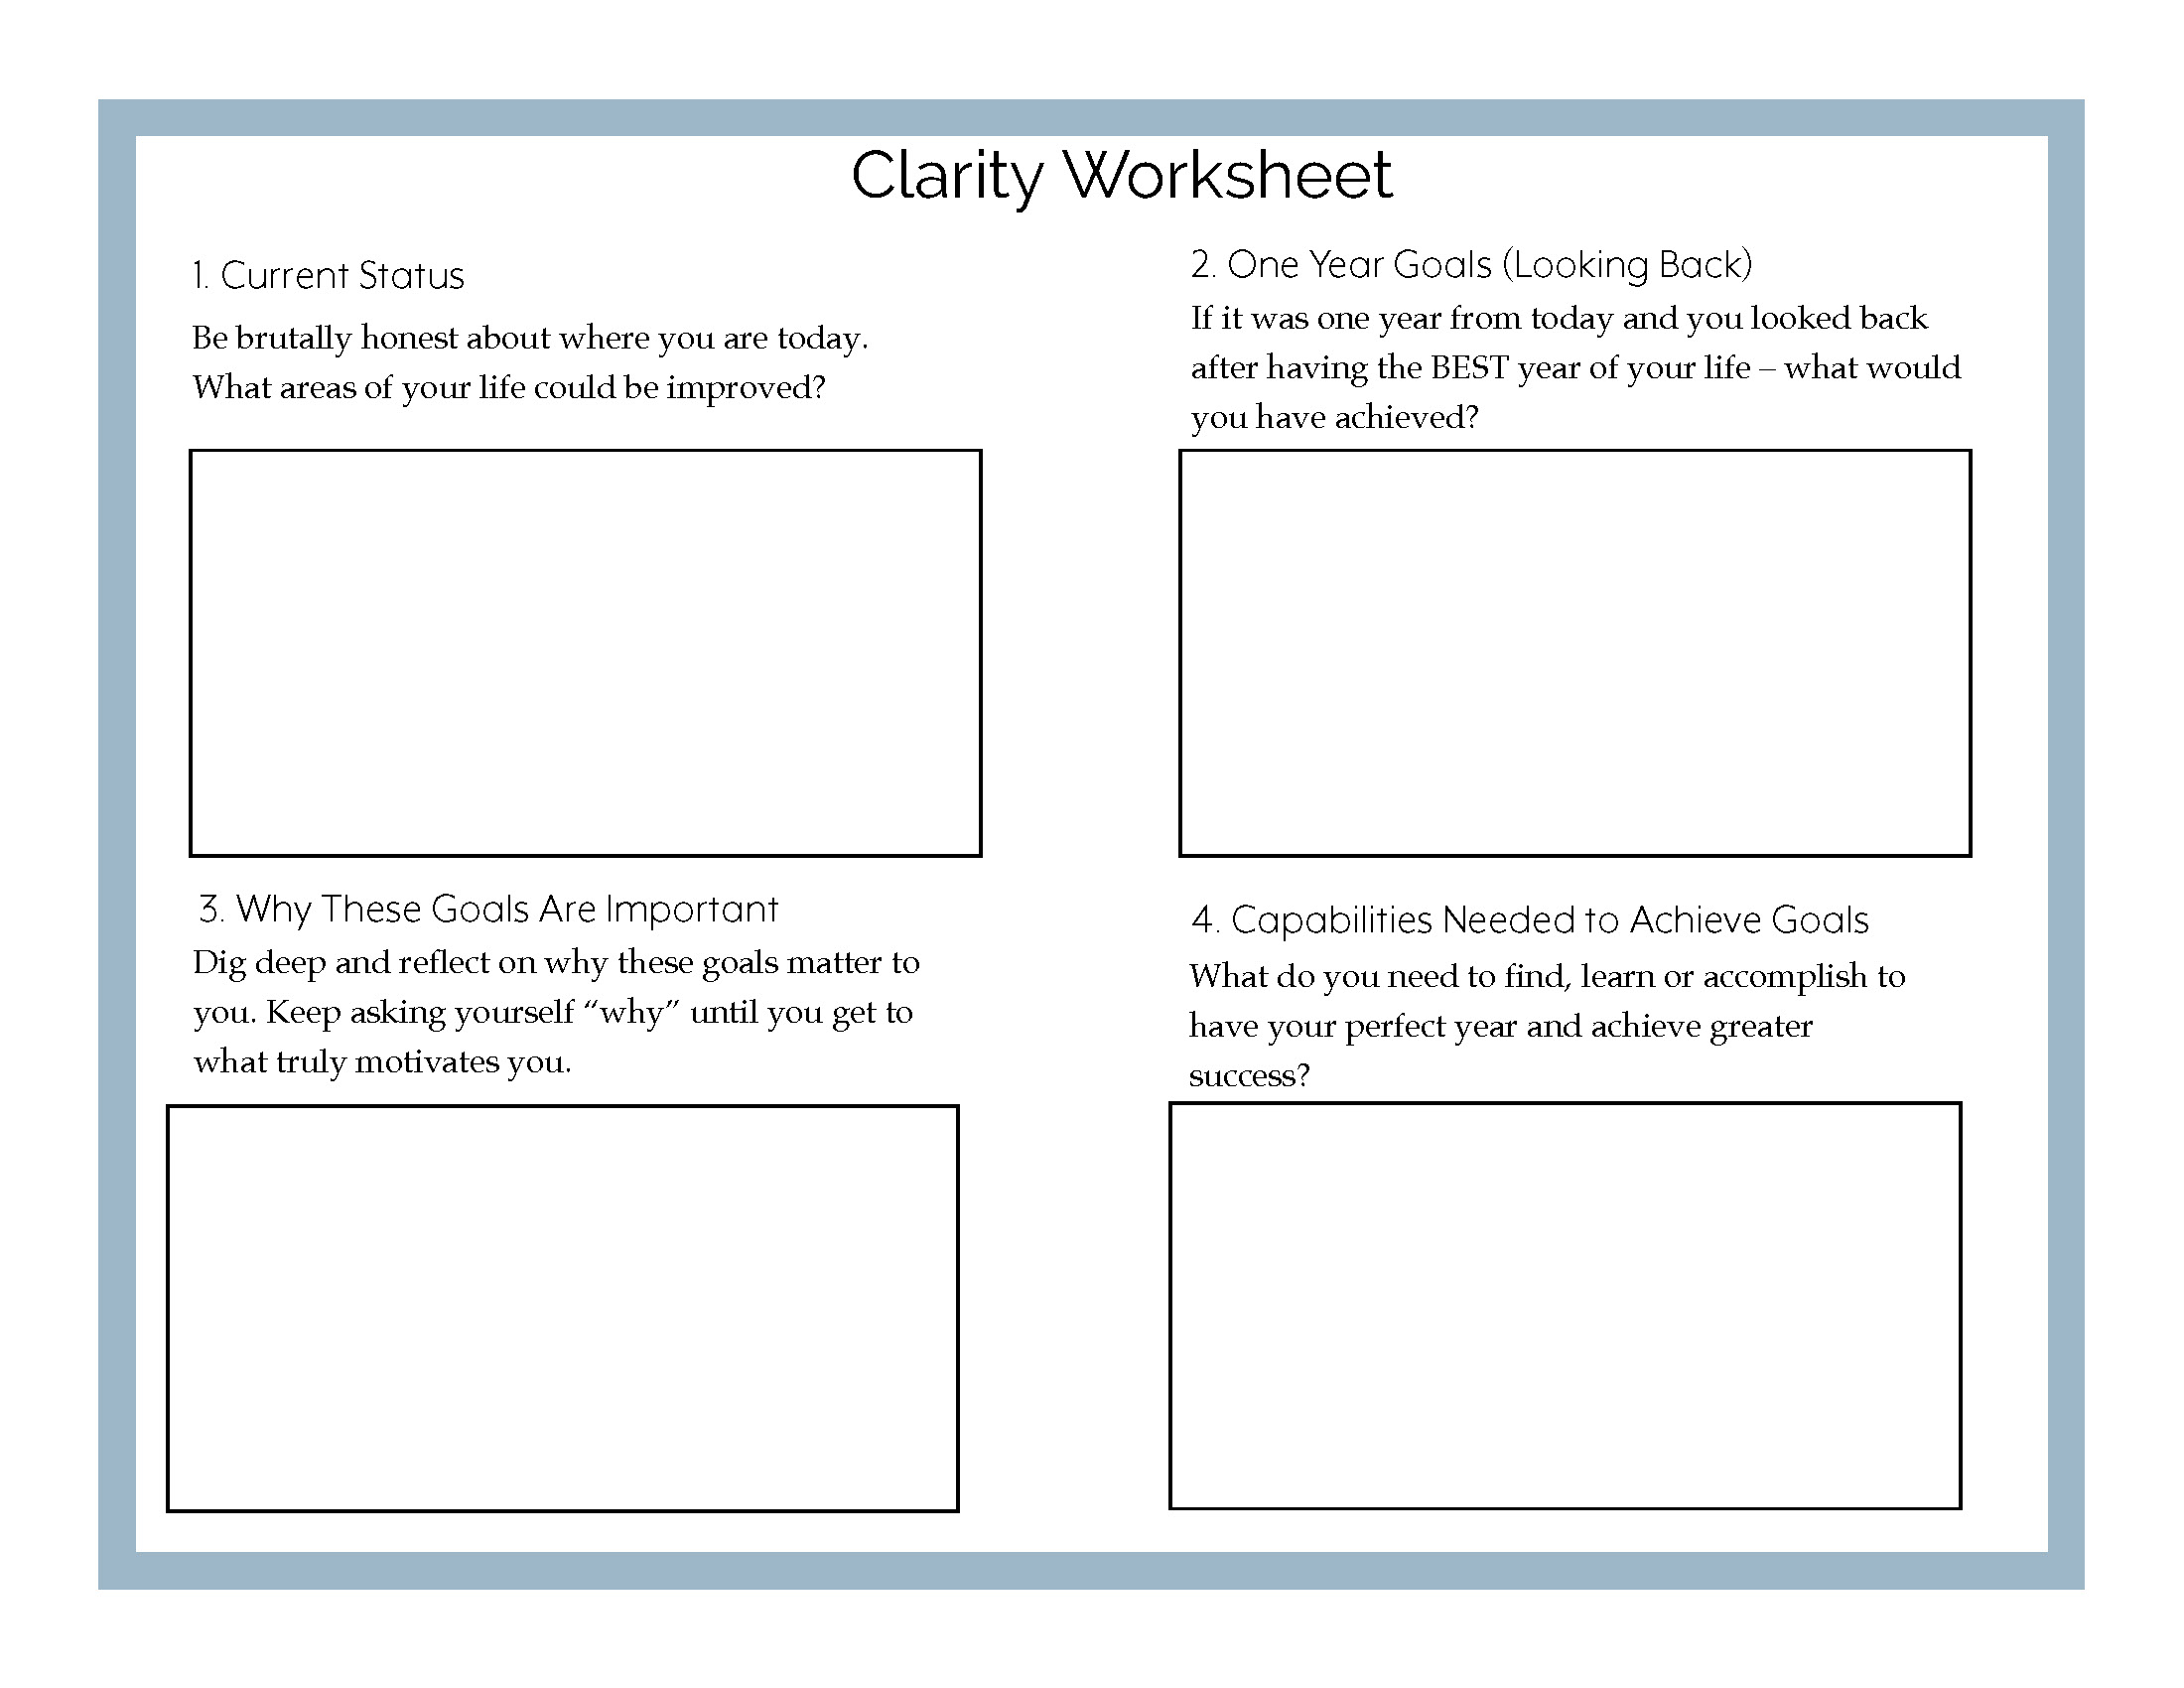 Clarity worksheet for work life harmony